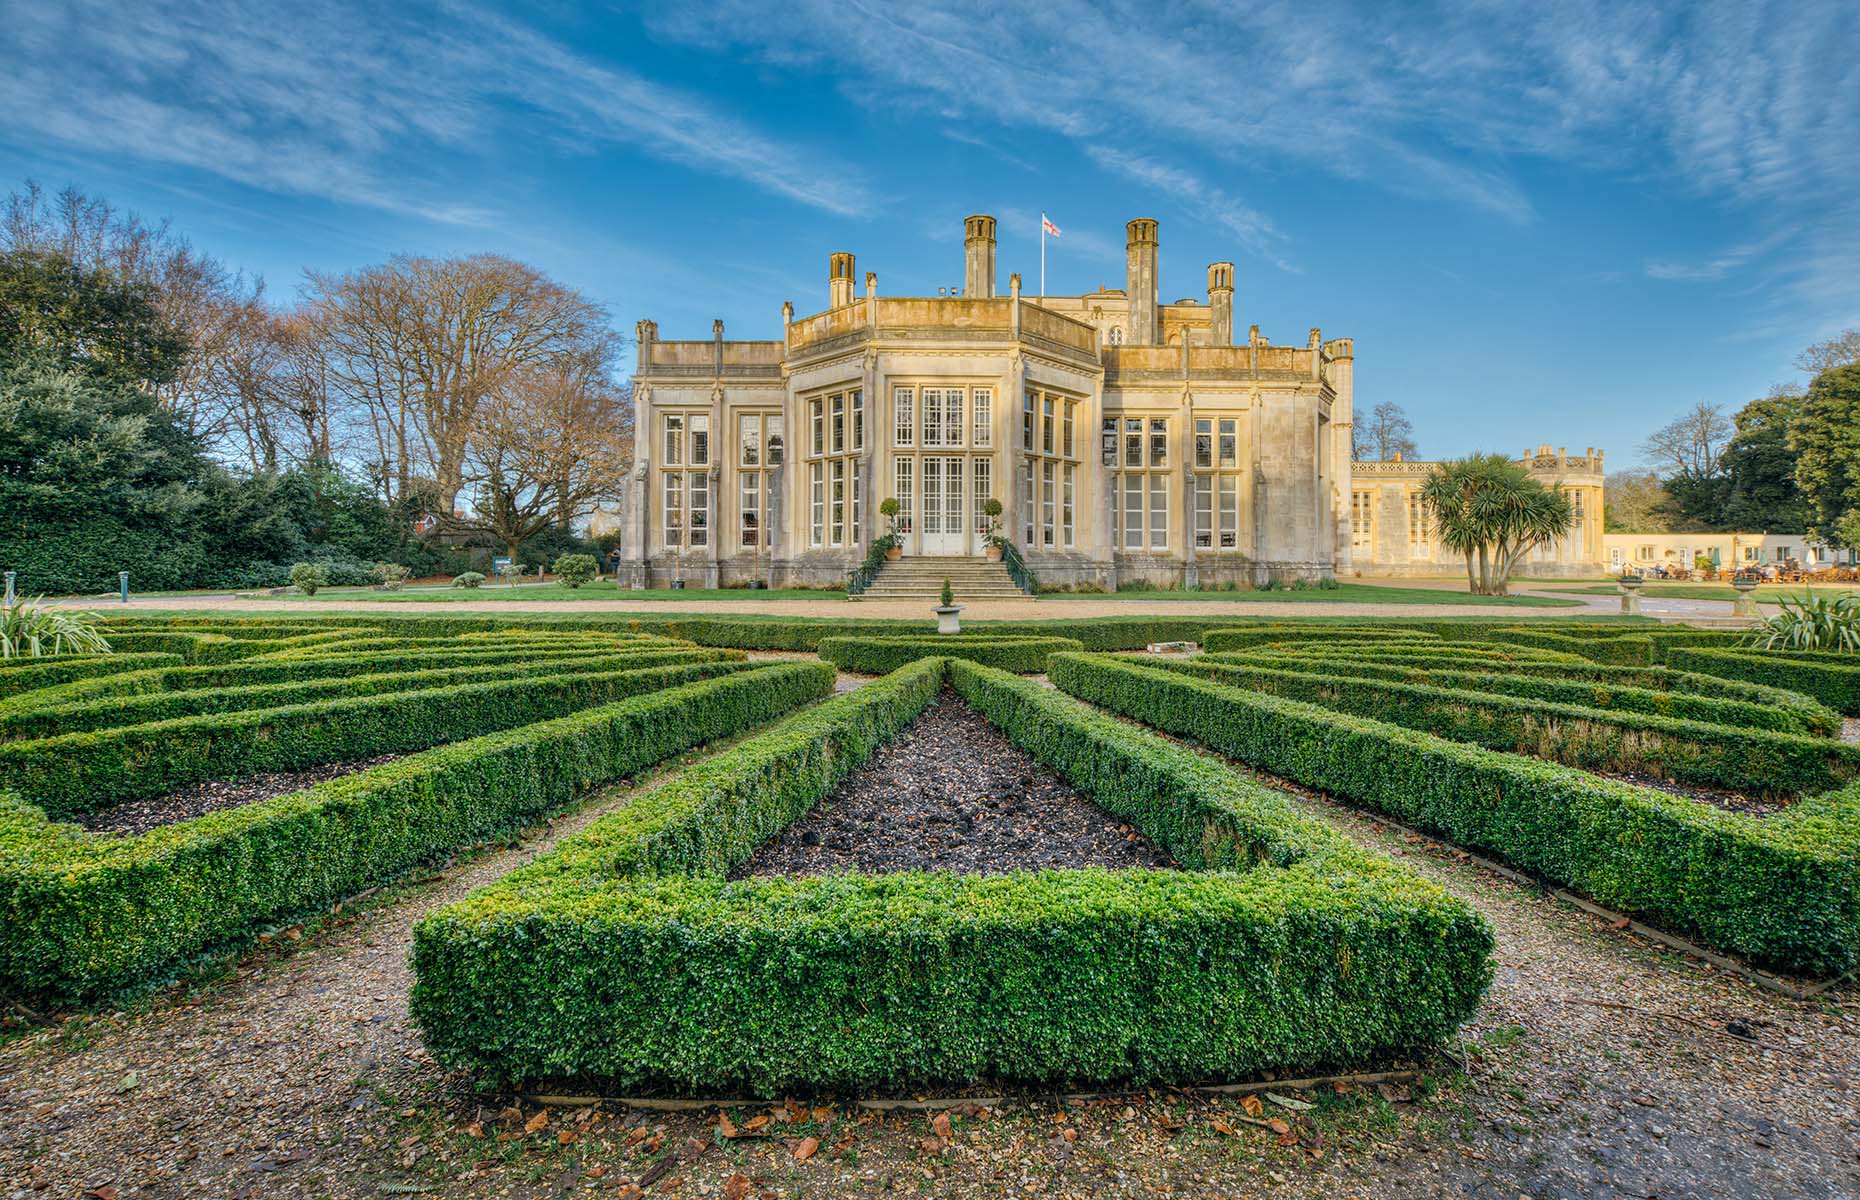 Highcliffe Castle (Image: tommyescapes/Shutterstock)